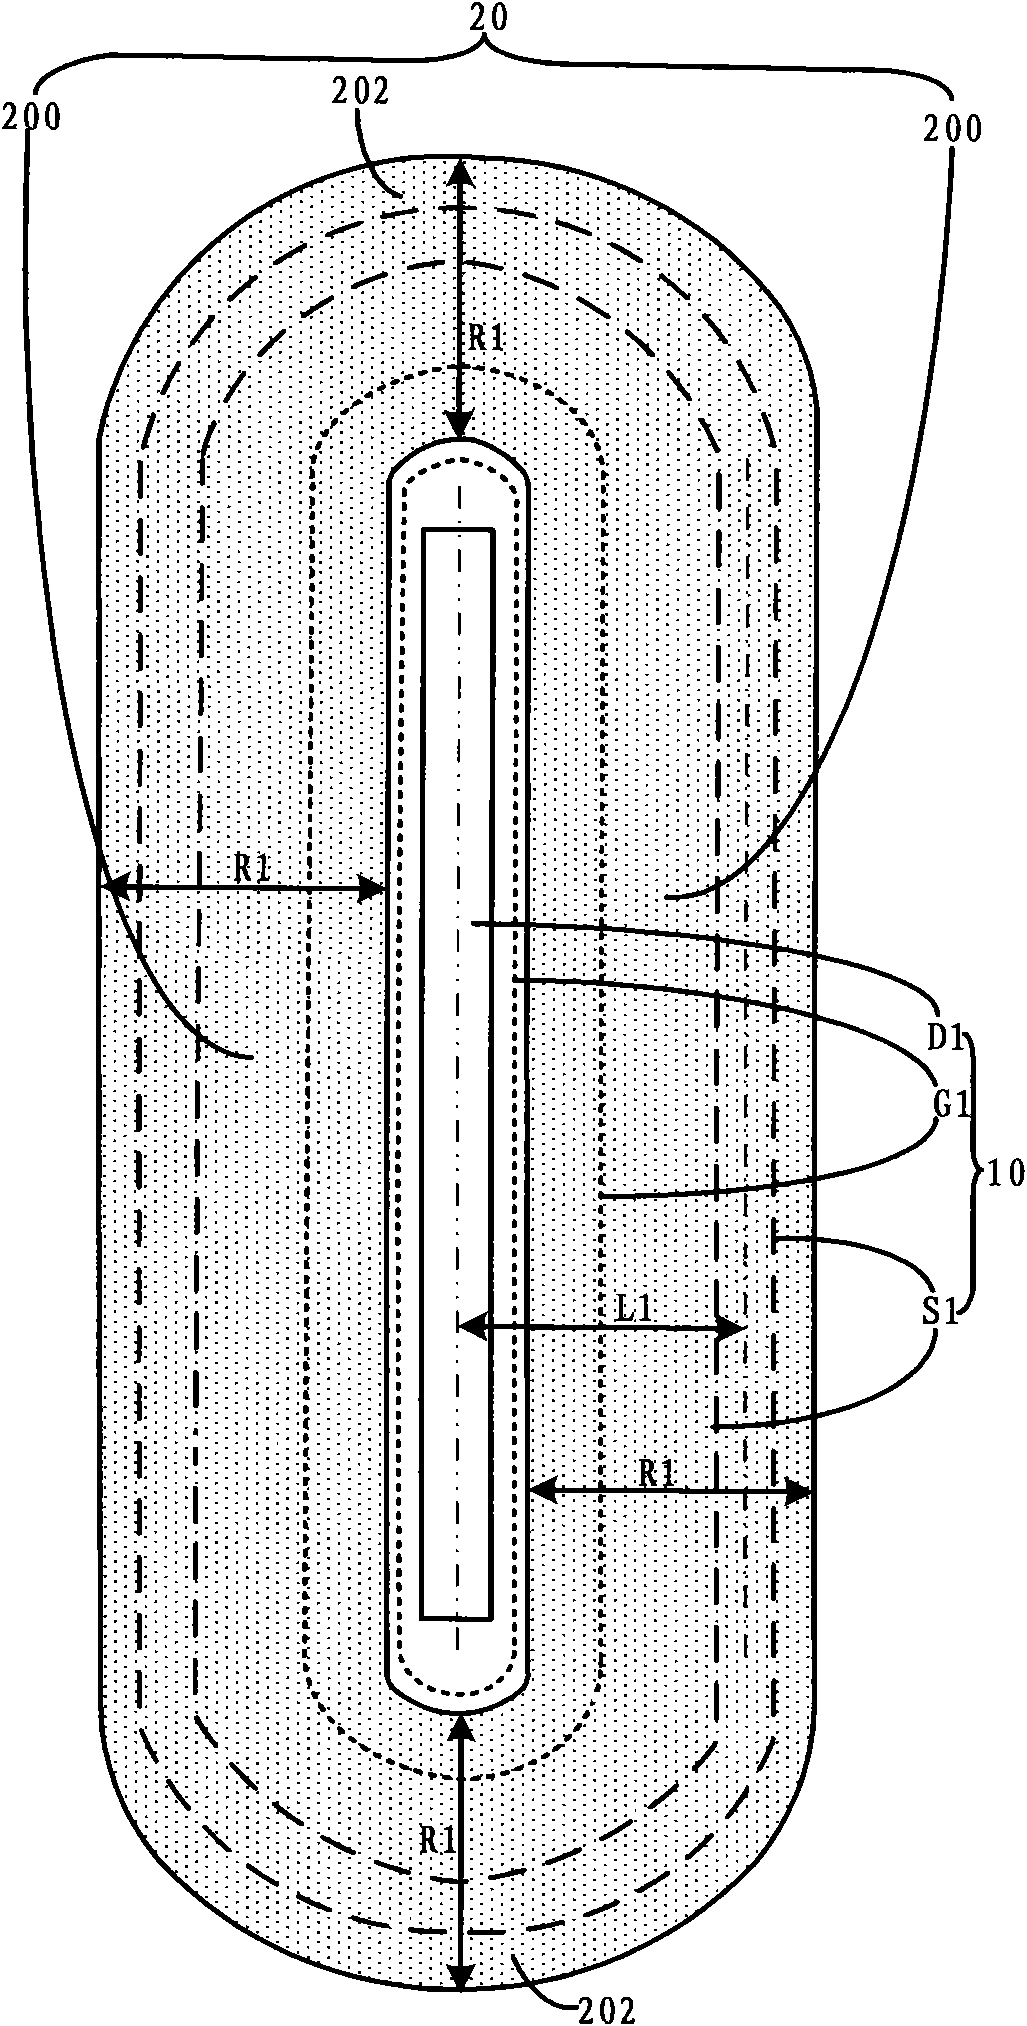 Element layout capable of increasing layout efficiency and integration degree